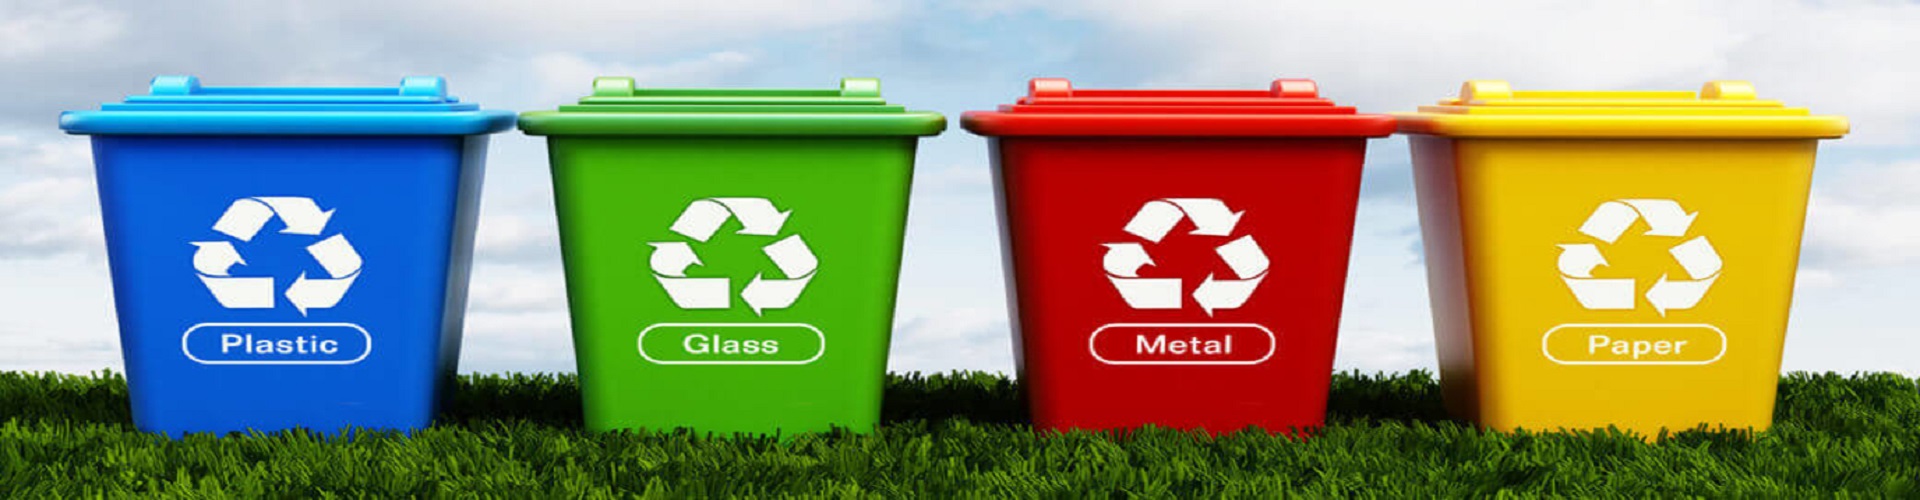 Why recycling is important for our environment?